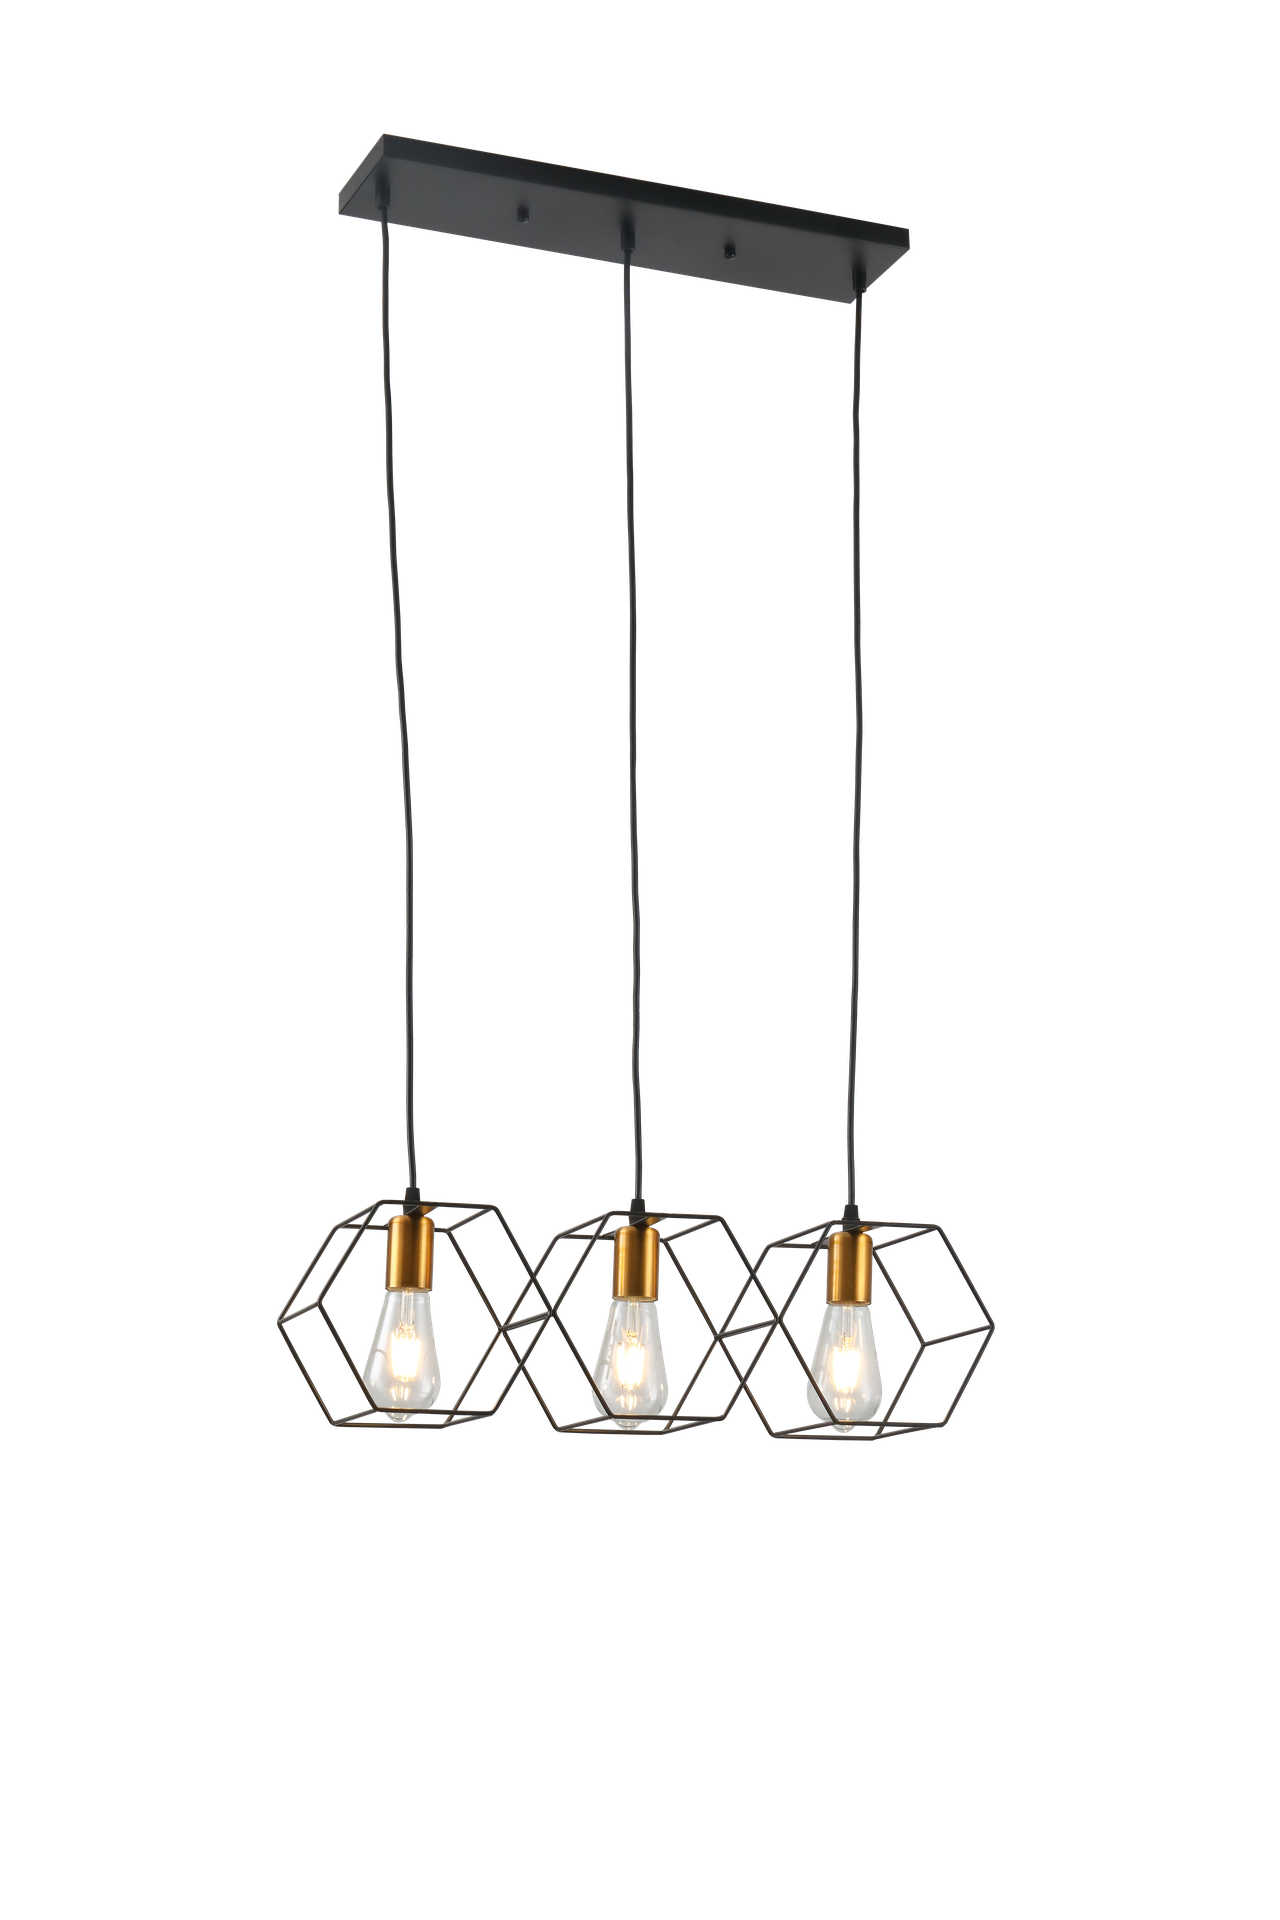 Pendant Lamp Black with Metal Structure and 3 Cooper Sockets 3xE27 120v/60Hz